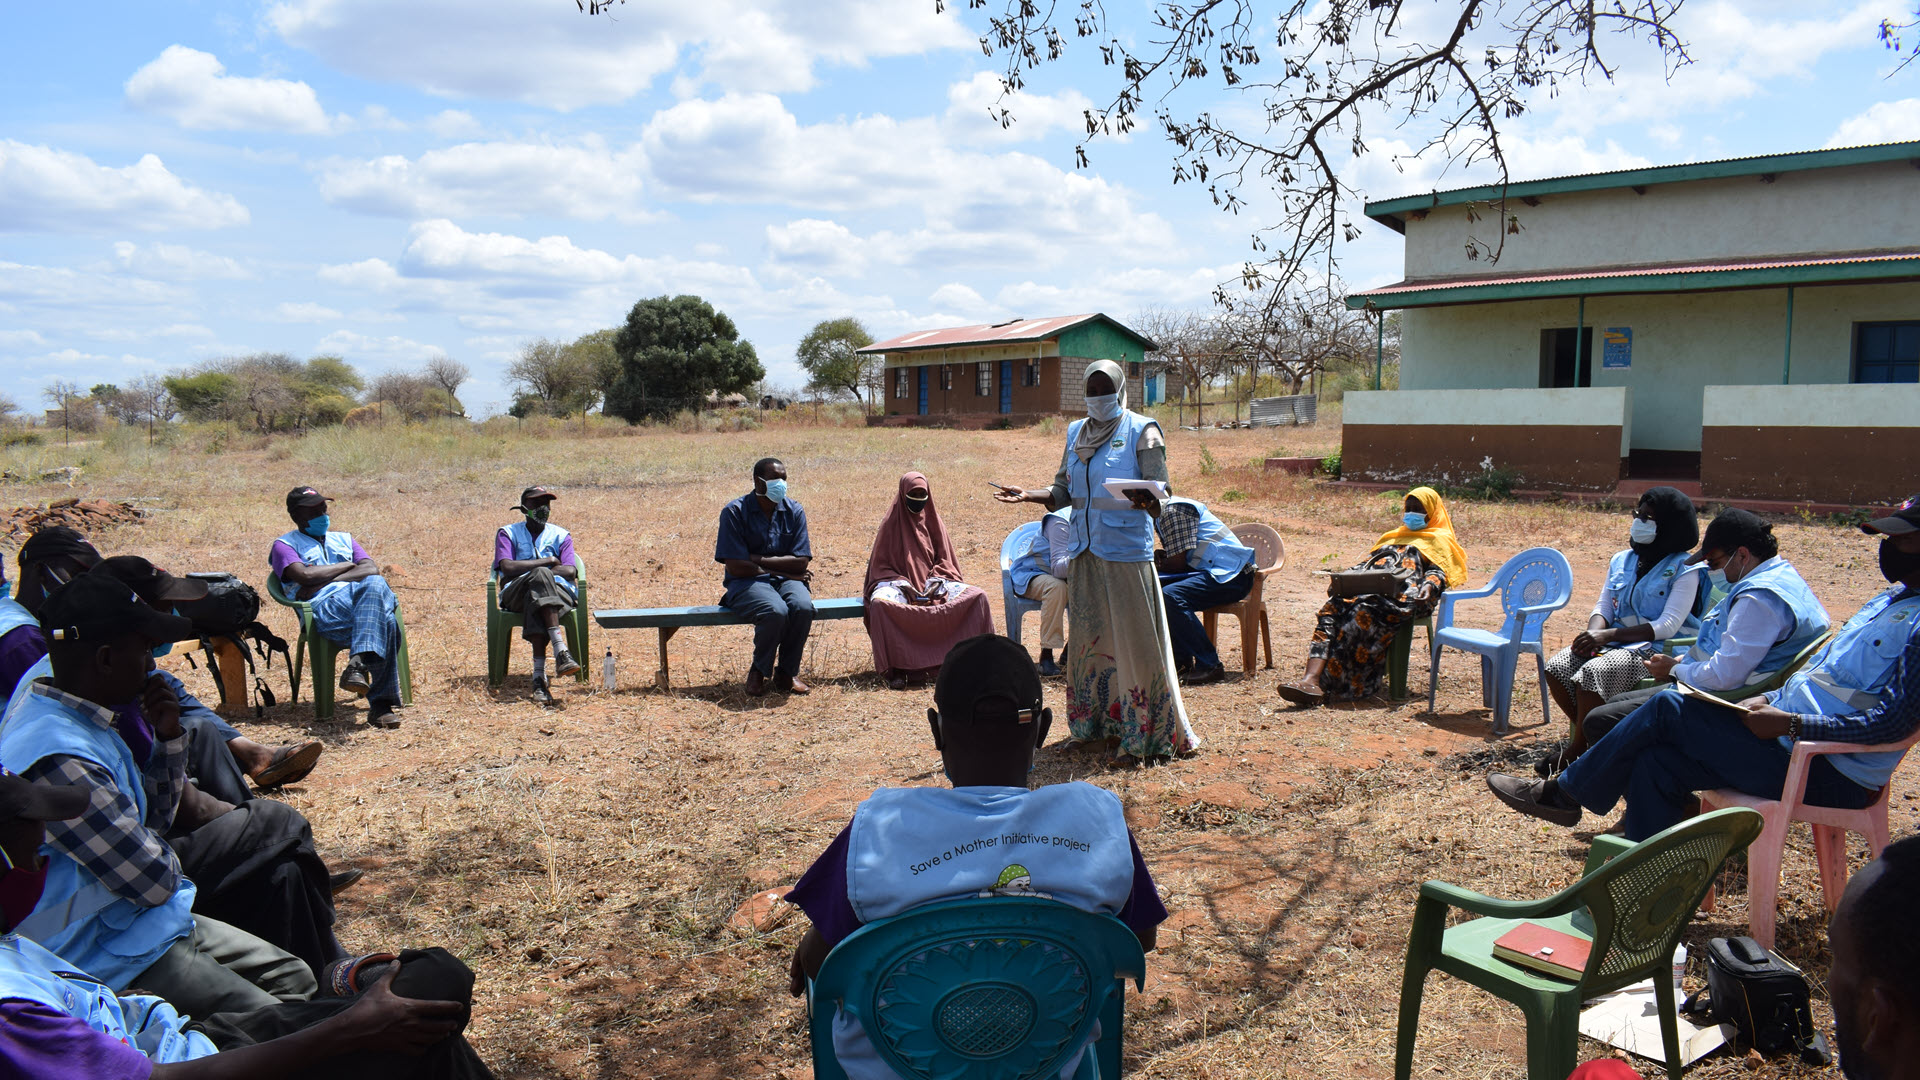 The profound and sustained impact of empowered community health workers